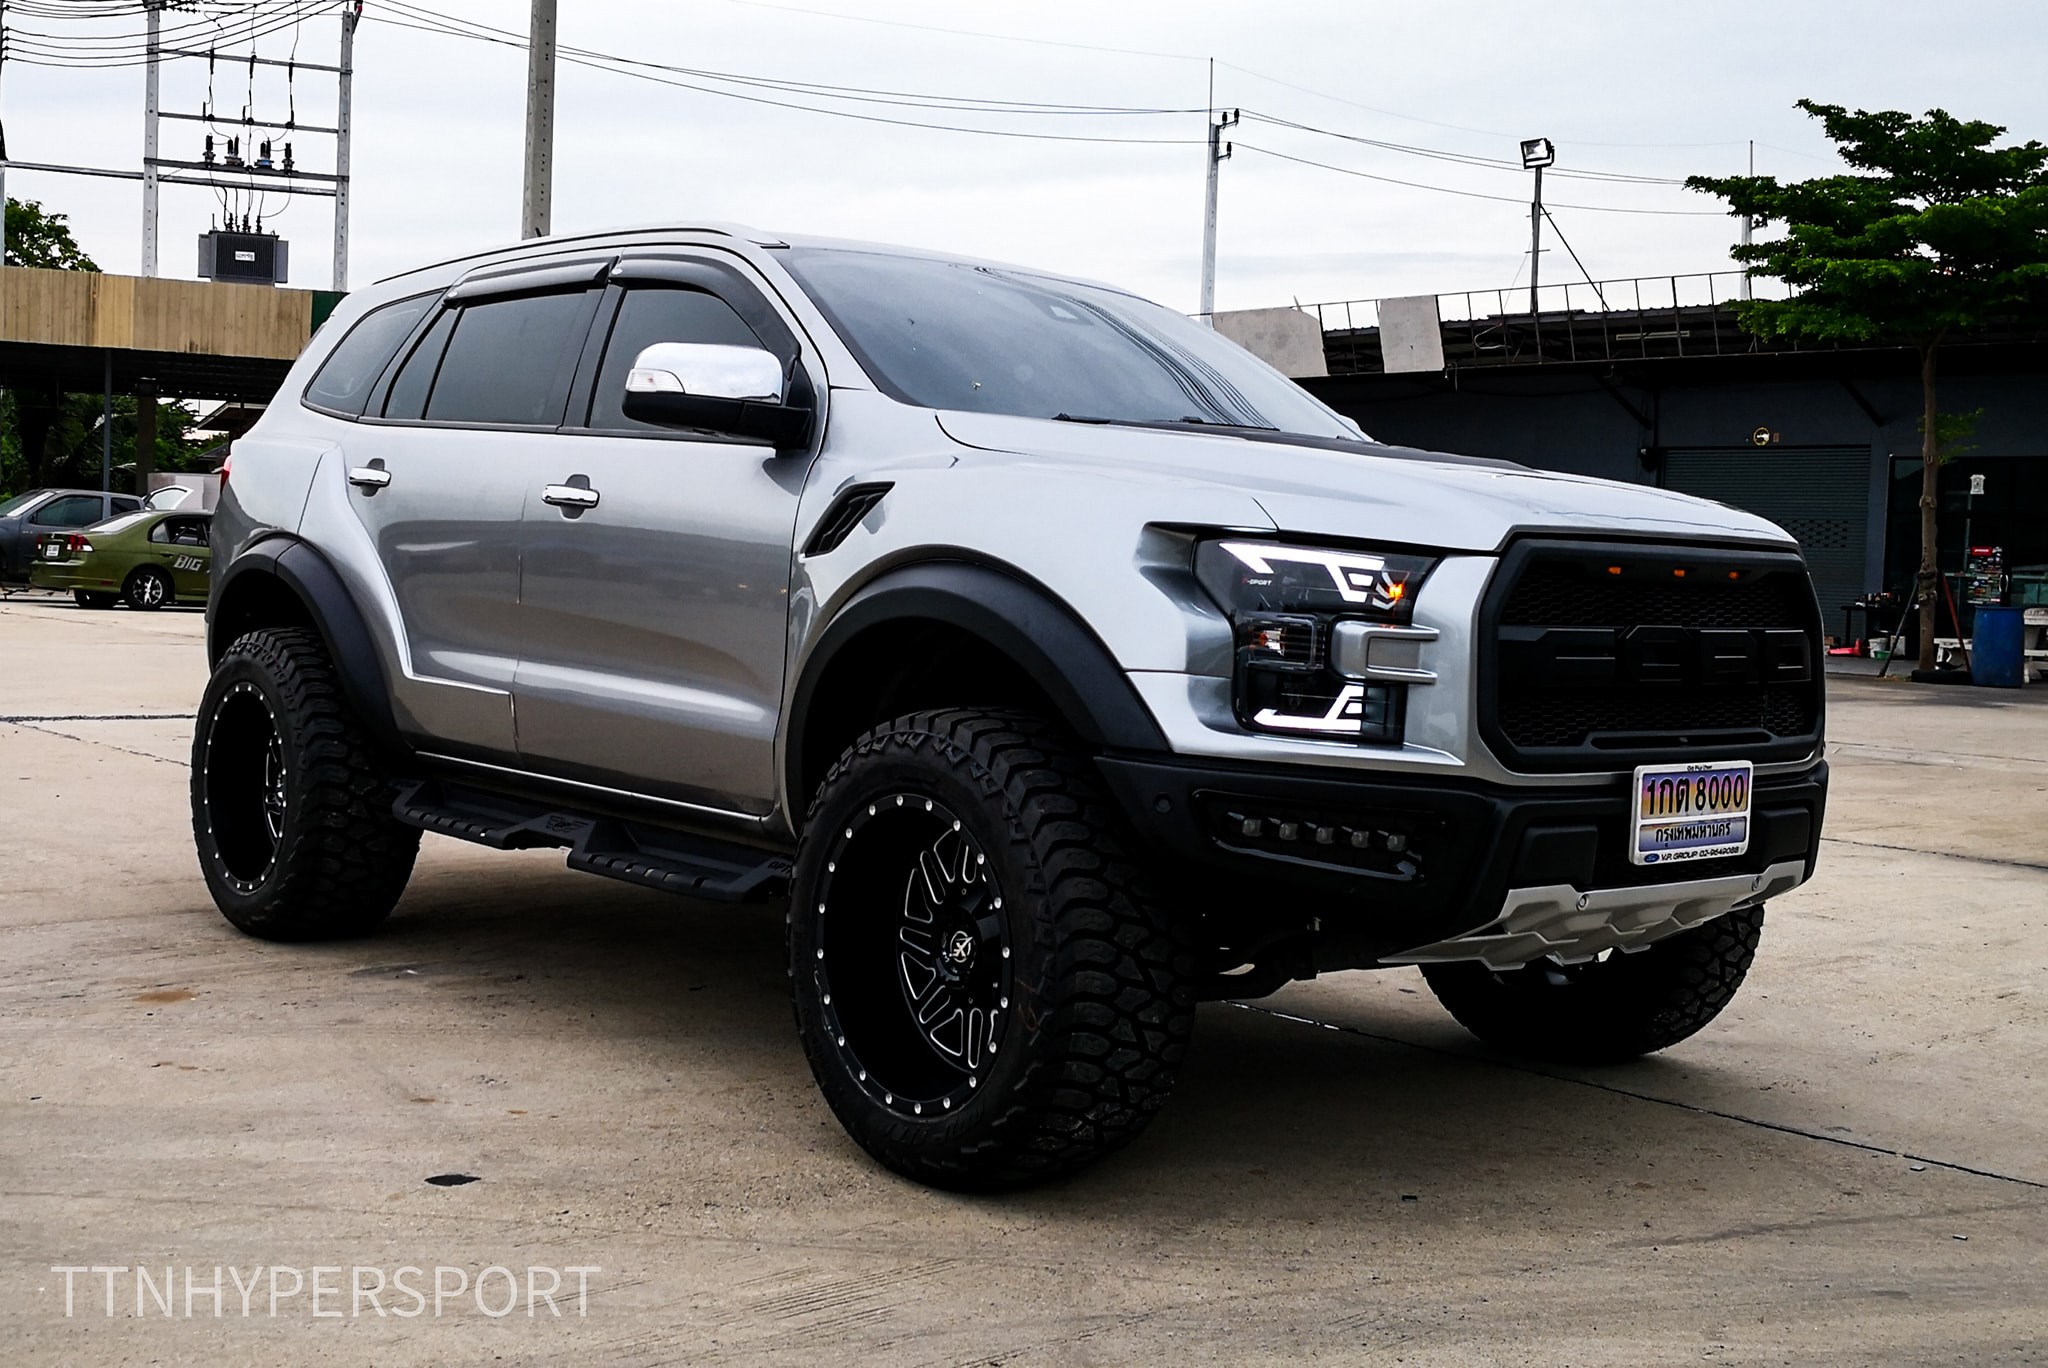 Ford Everest “f 150 Raptor” By Ttn Hypersport Is Thai Tuning At Its